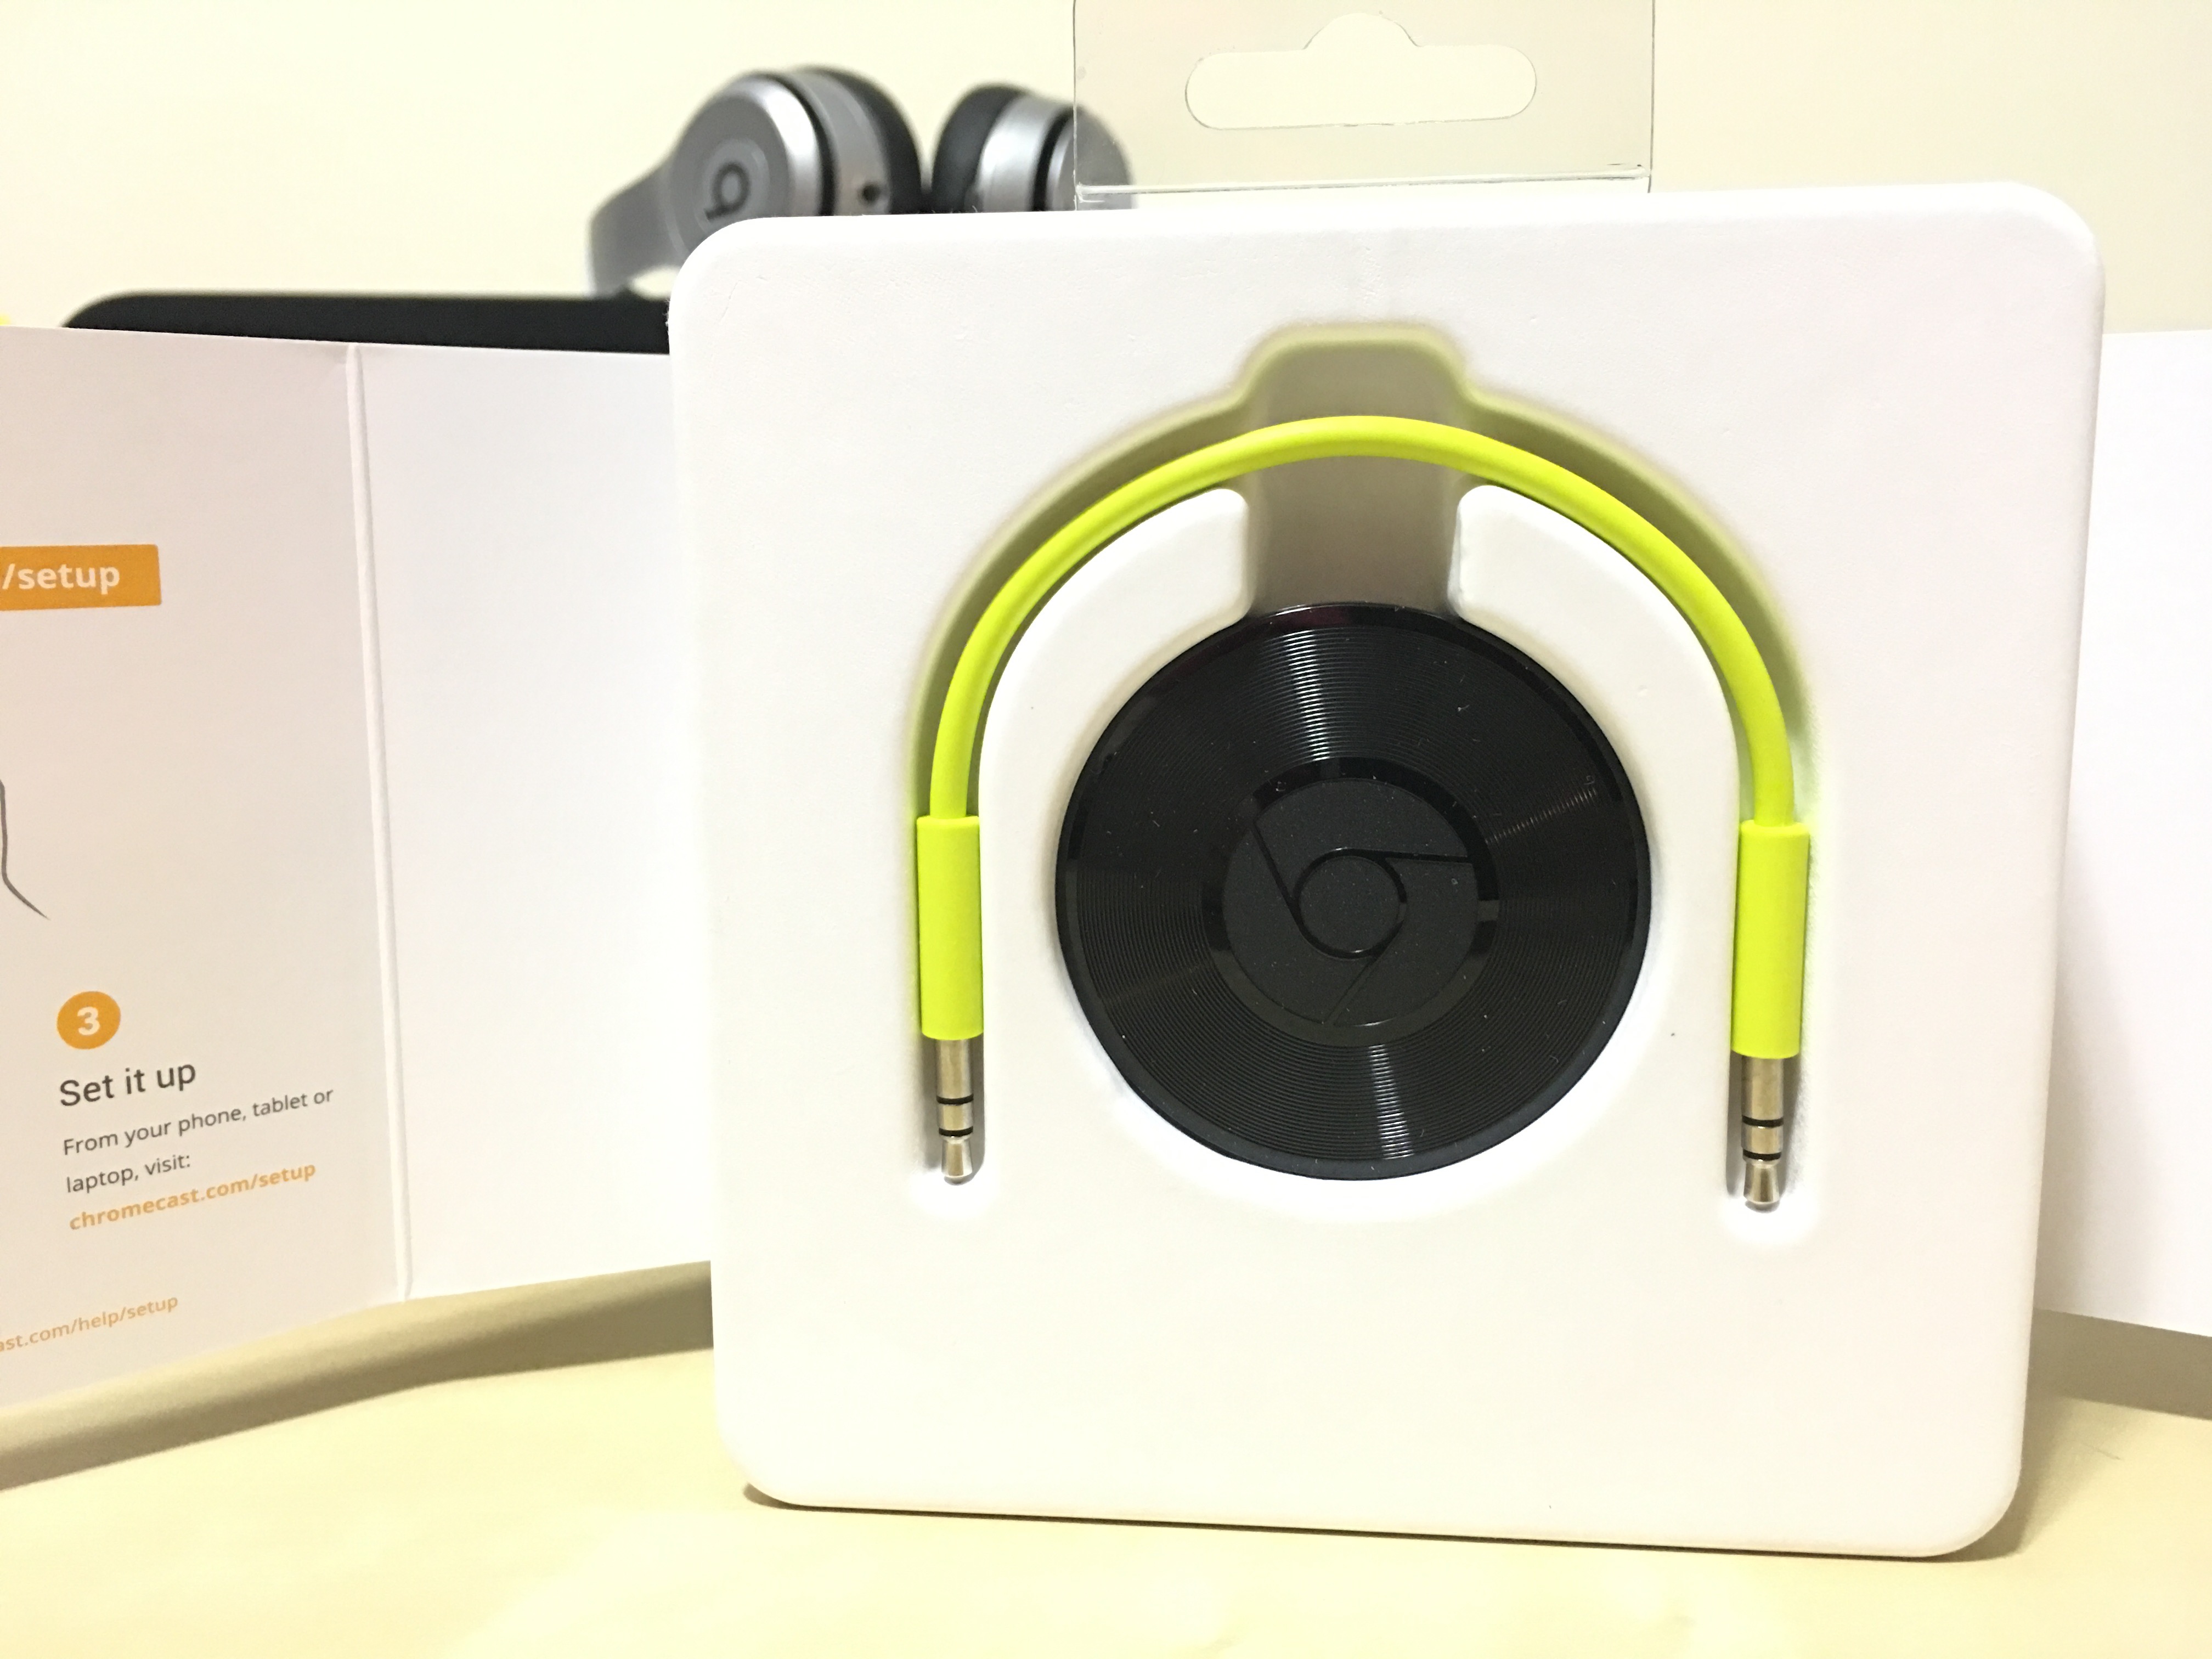 Følsom Cordelia læsning Review: Chromecast Audio brings new life to dated speakers for just $35 -  9to5Mac